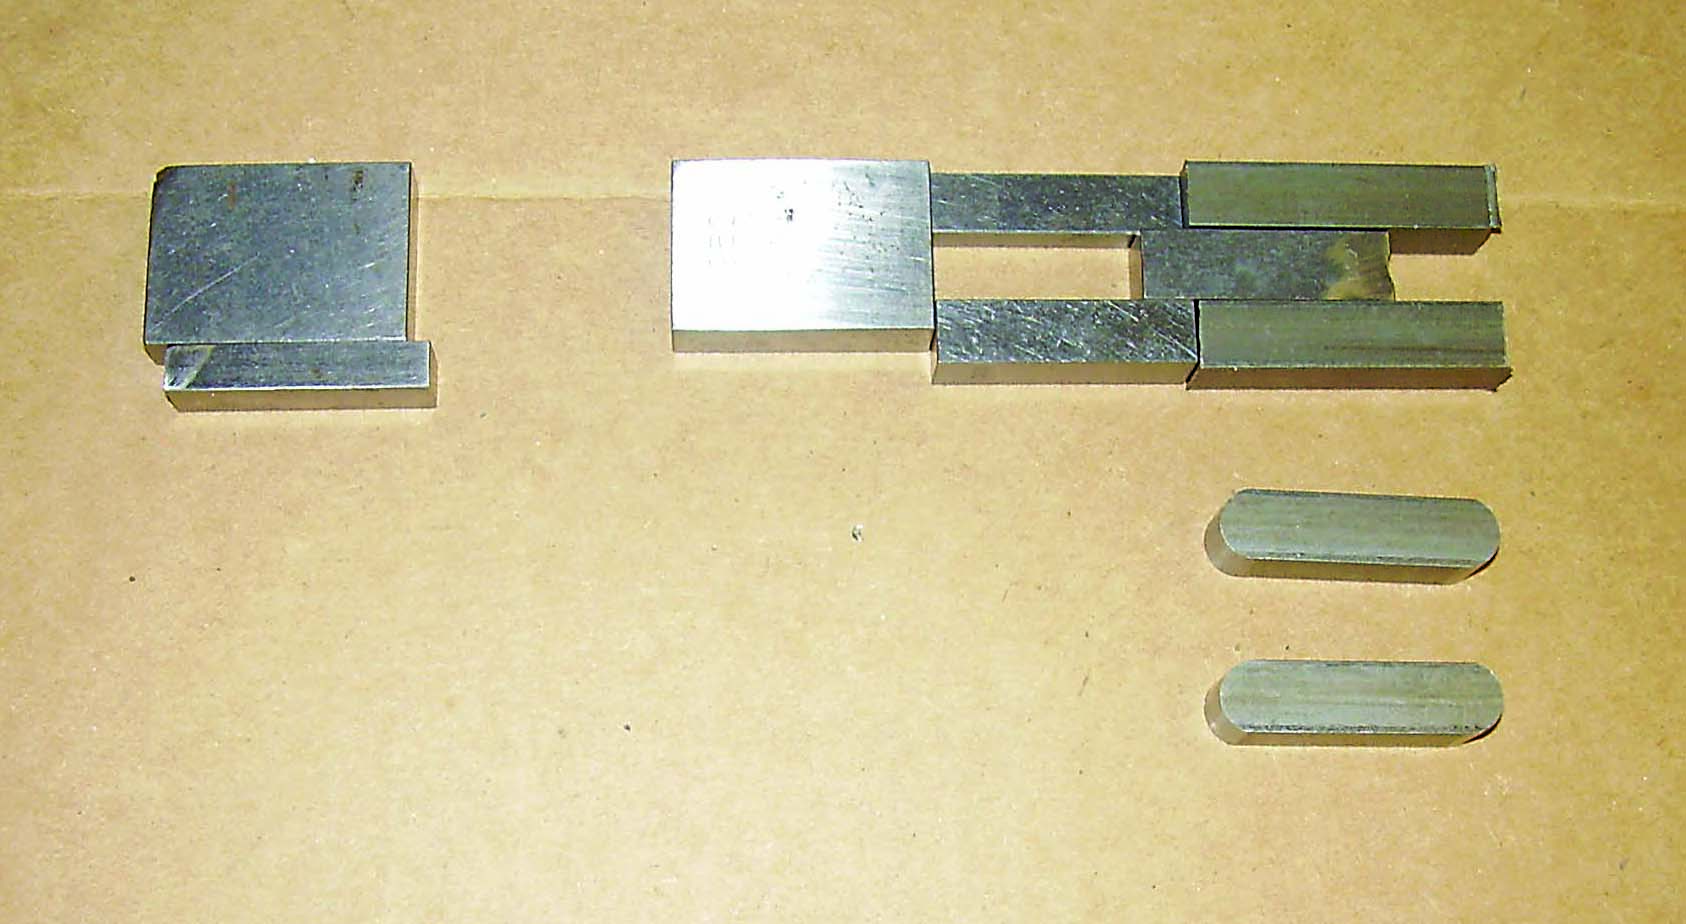 Displayed are the different gauge blocks with the key blanks out of the vise, along with a couple of finished keys.